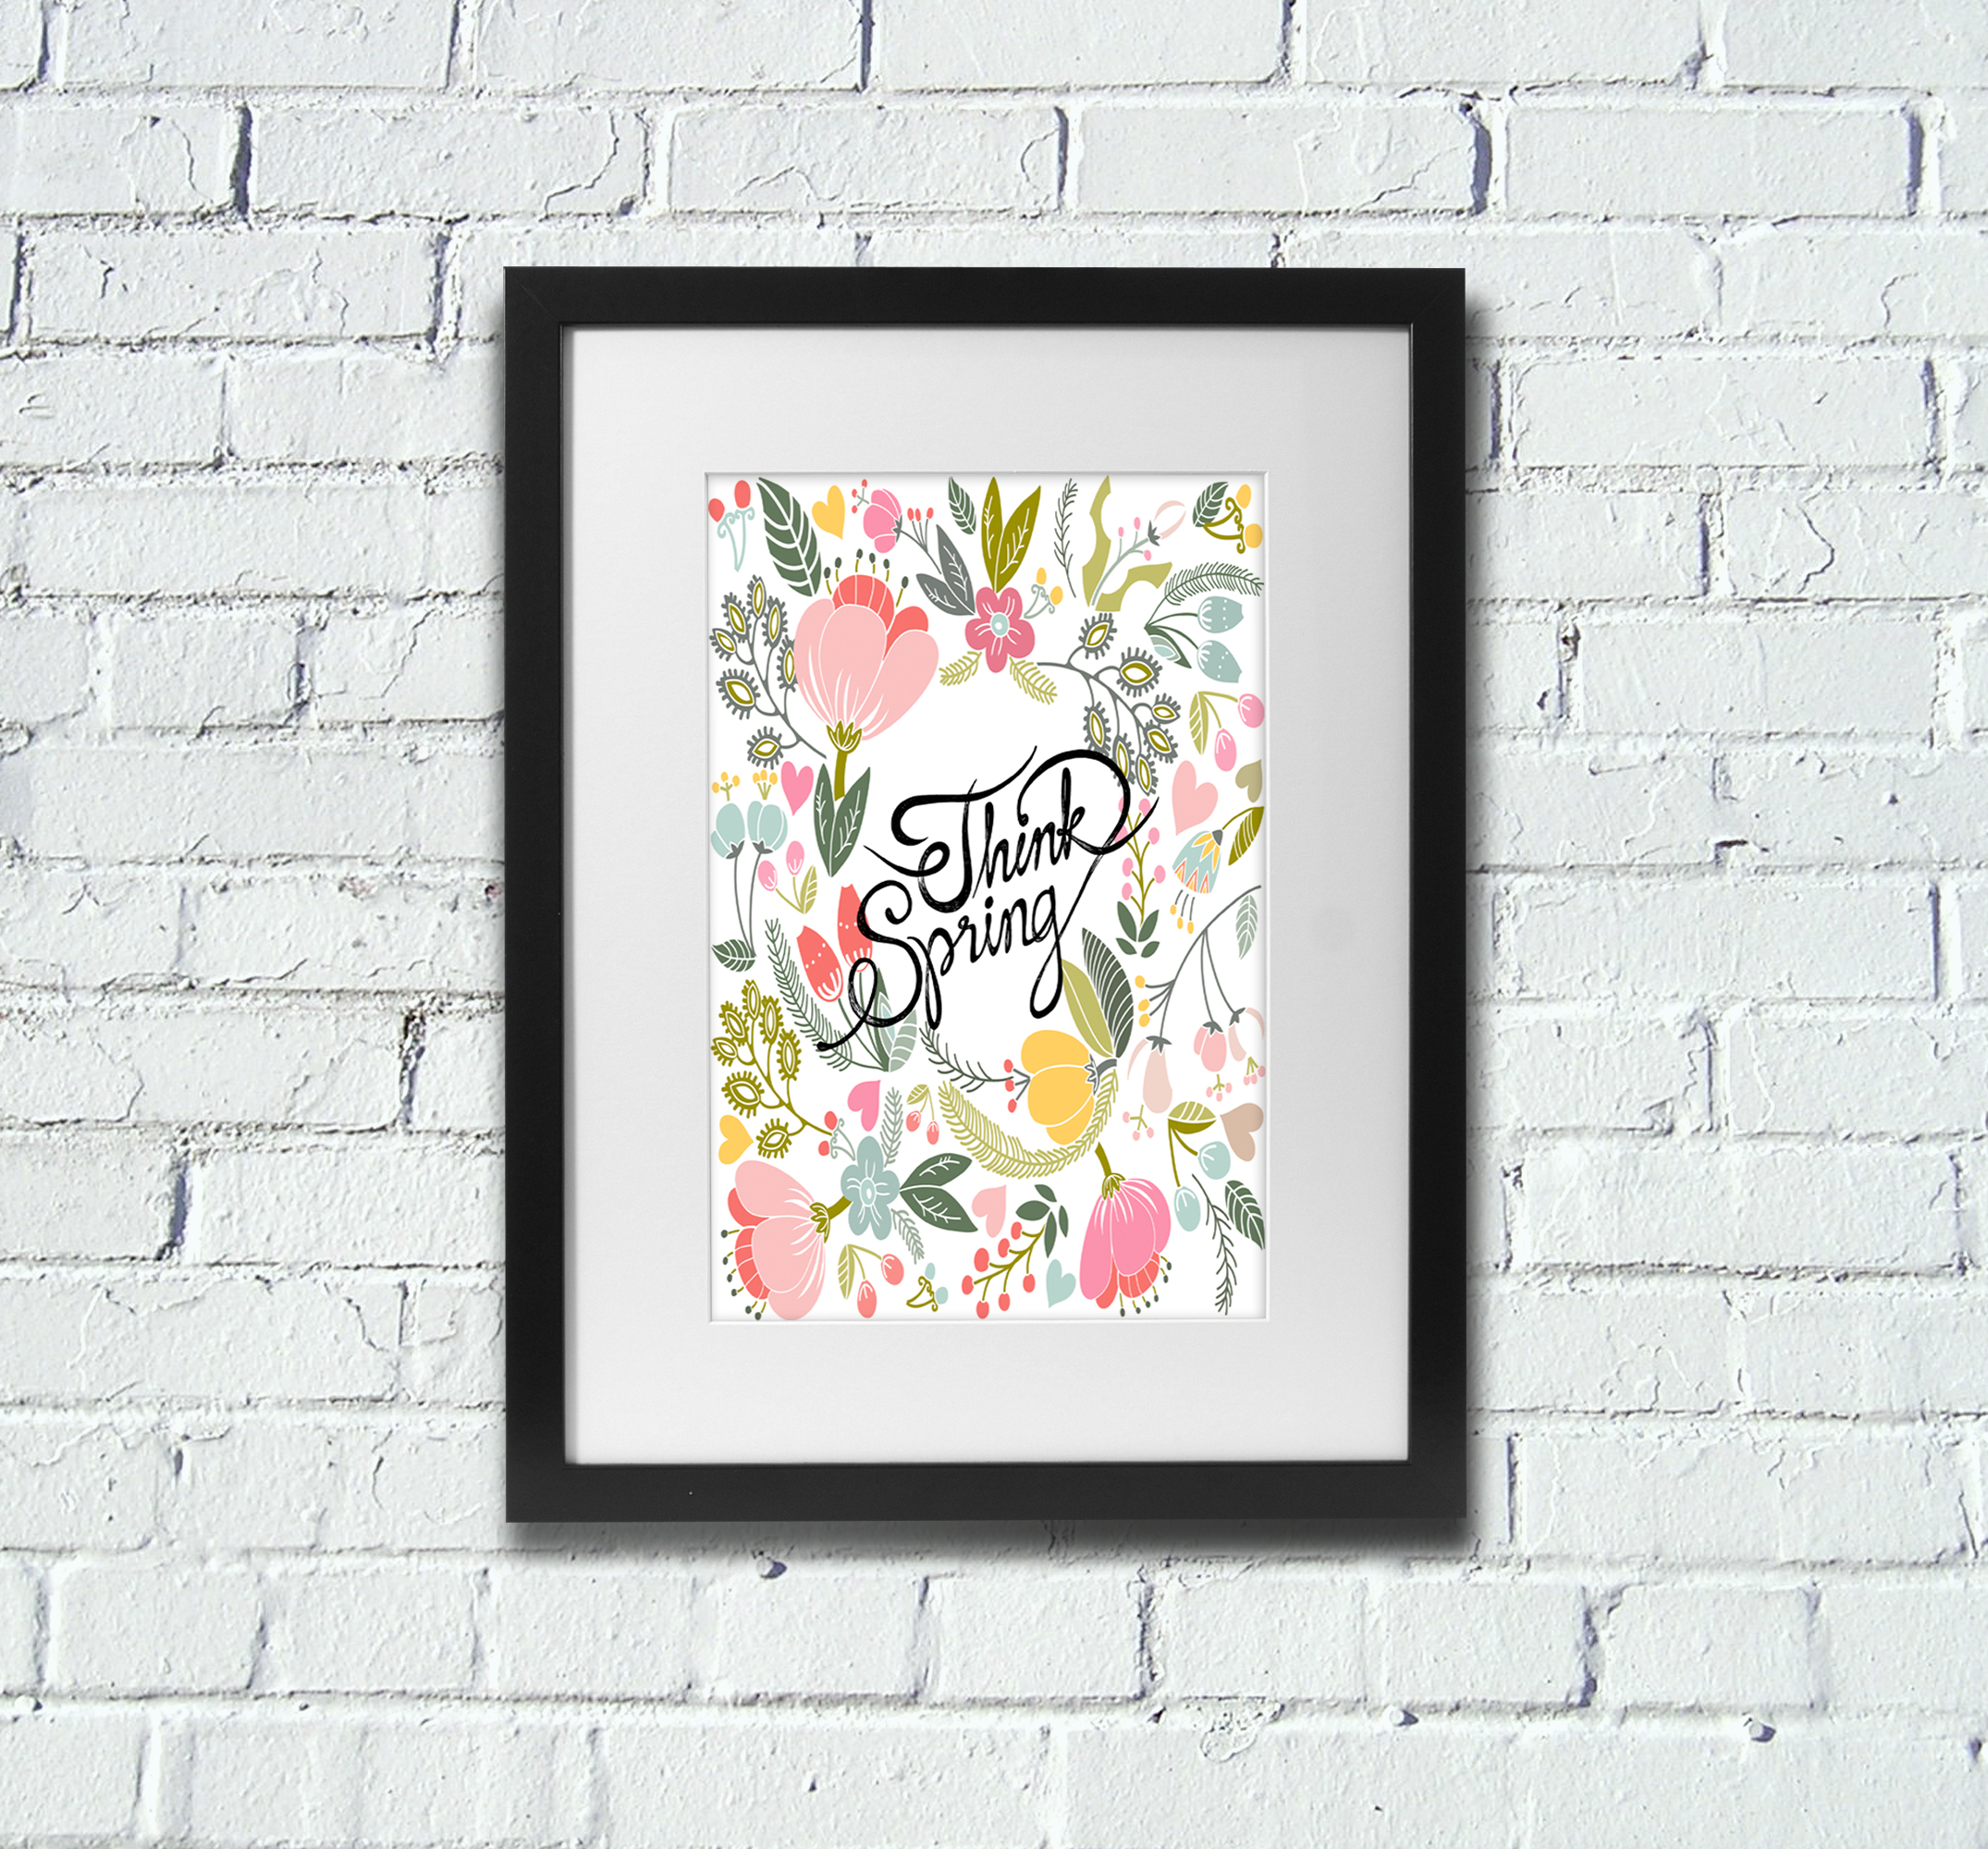 Free Printable Wall Art - Spring Poster - The Graffical Muse